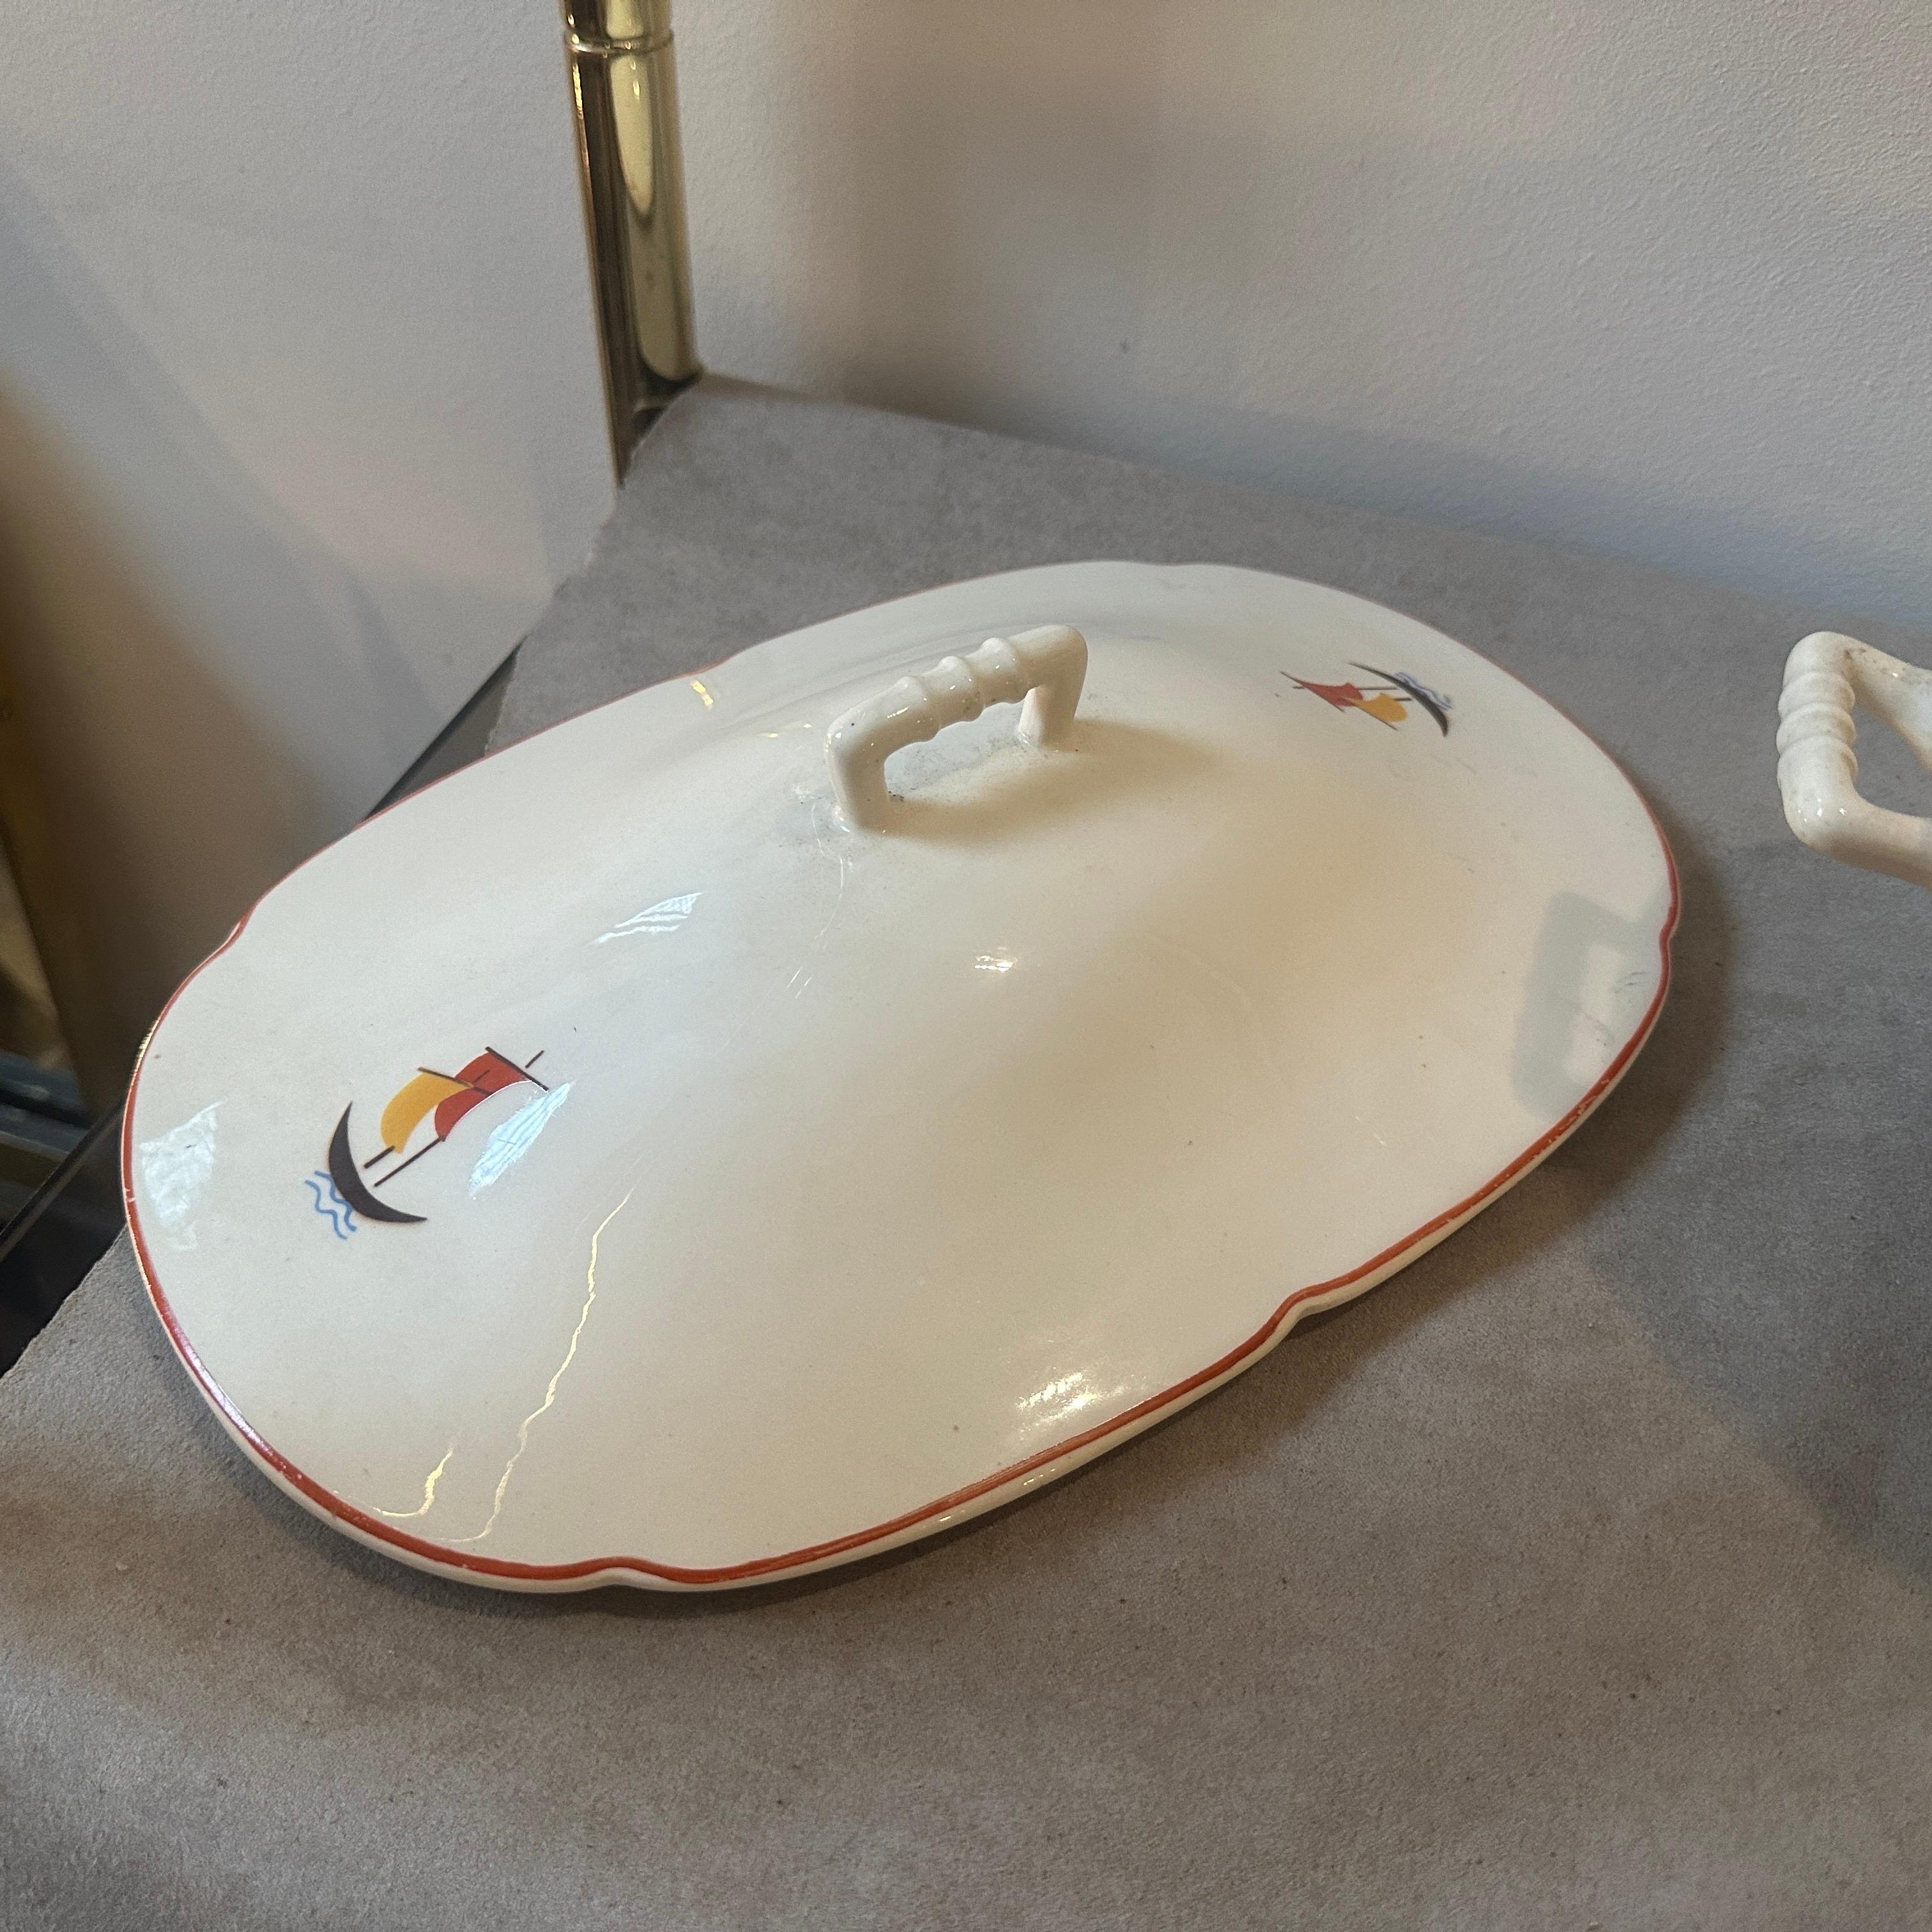 1935s Art Deco Ceramic Soup Tureen by Gio Ponti for S.C. Richard  For Sale 1